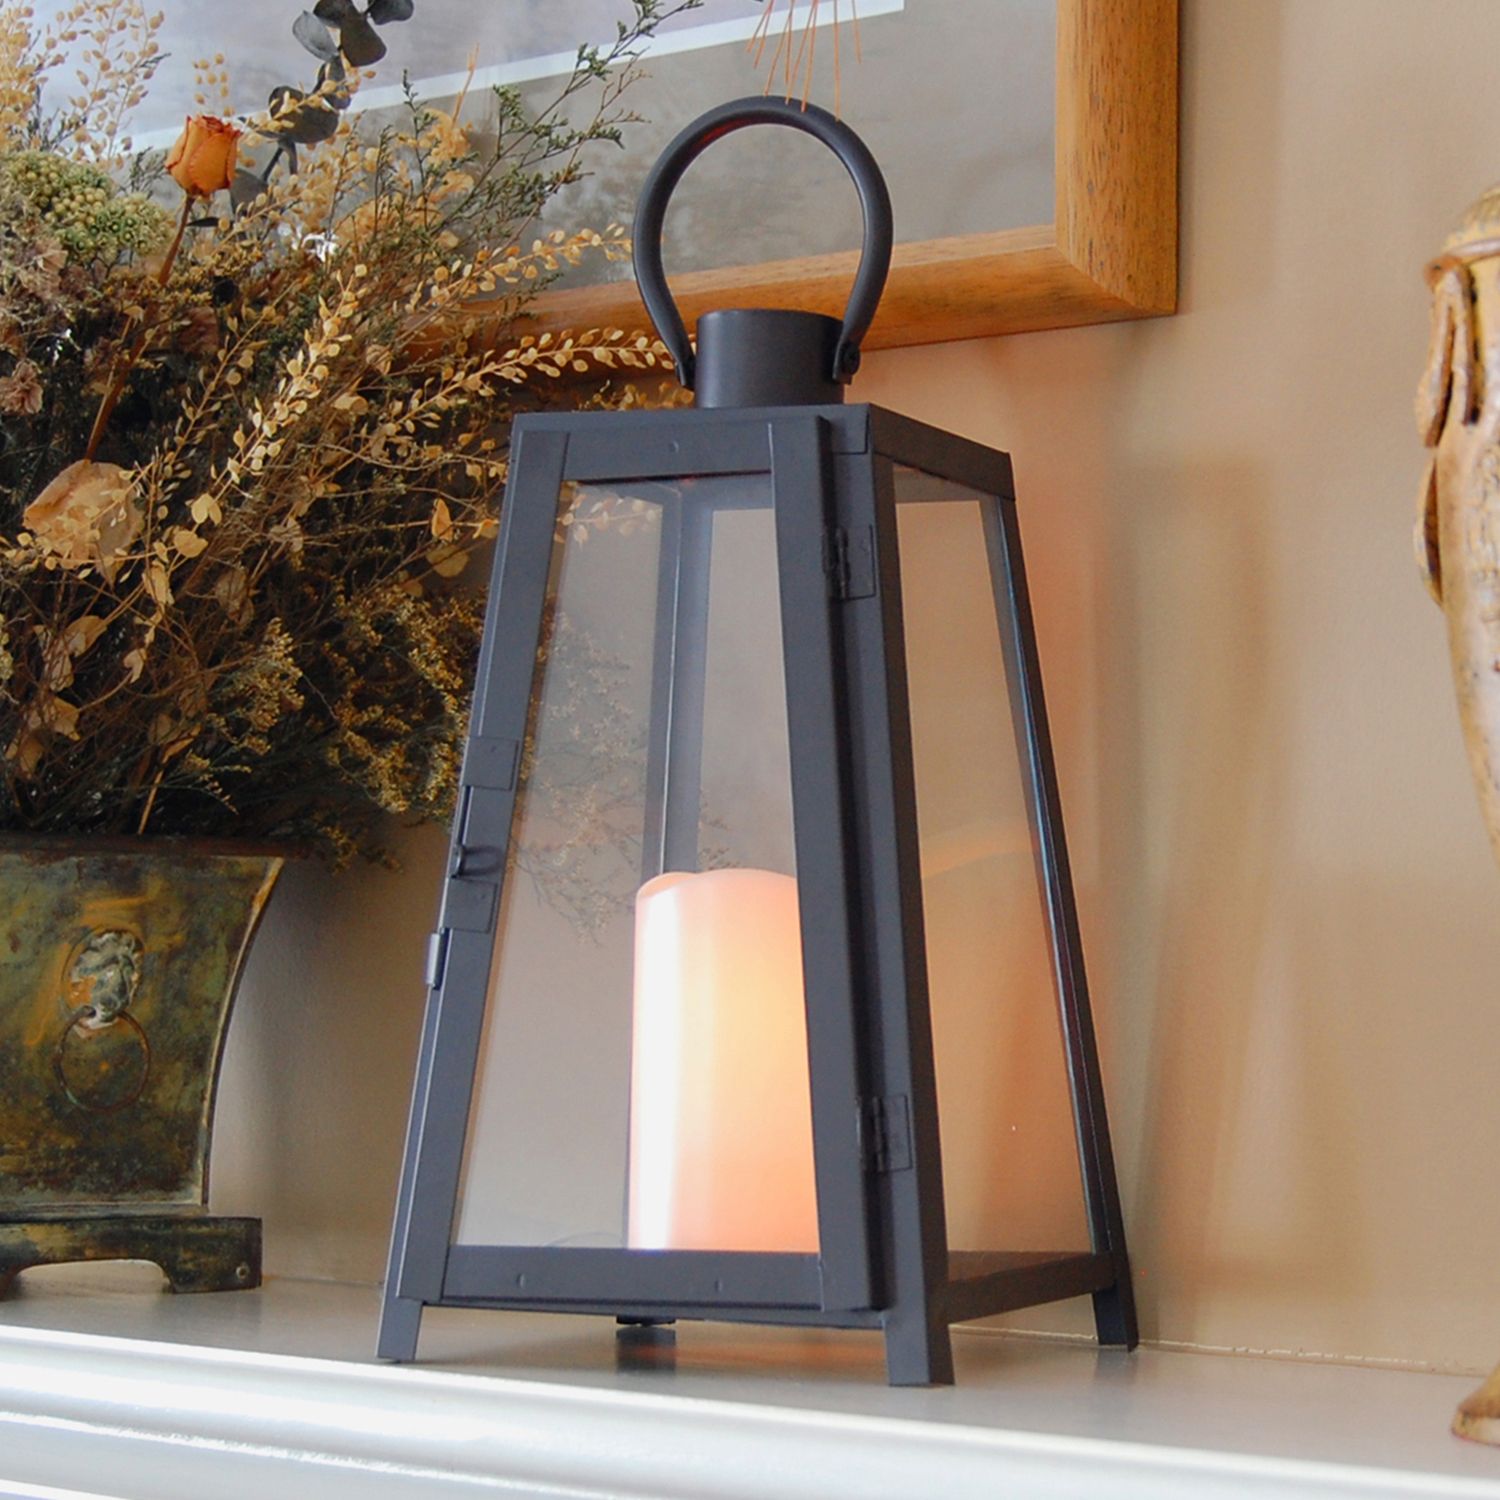 A stunning lantern or candle can elevate the look of a shelf or fireplace mantle.